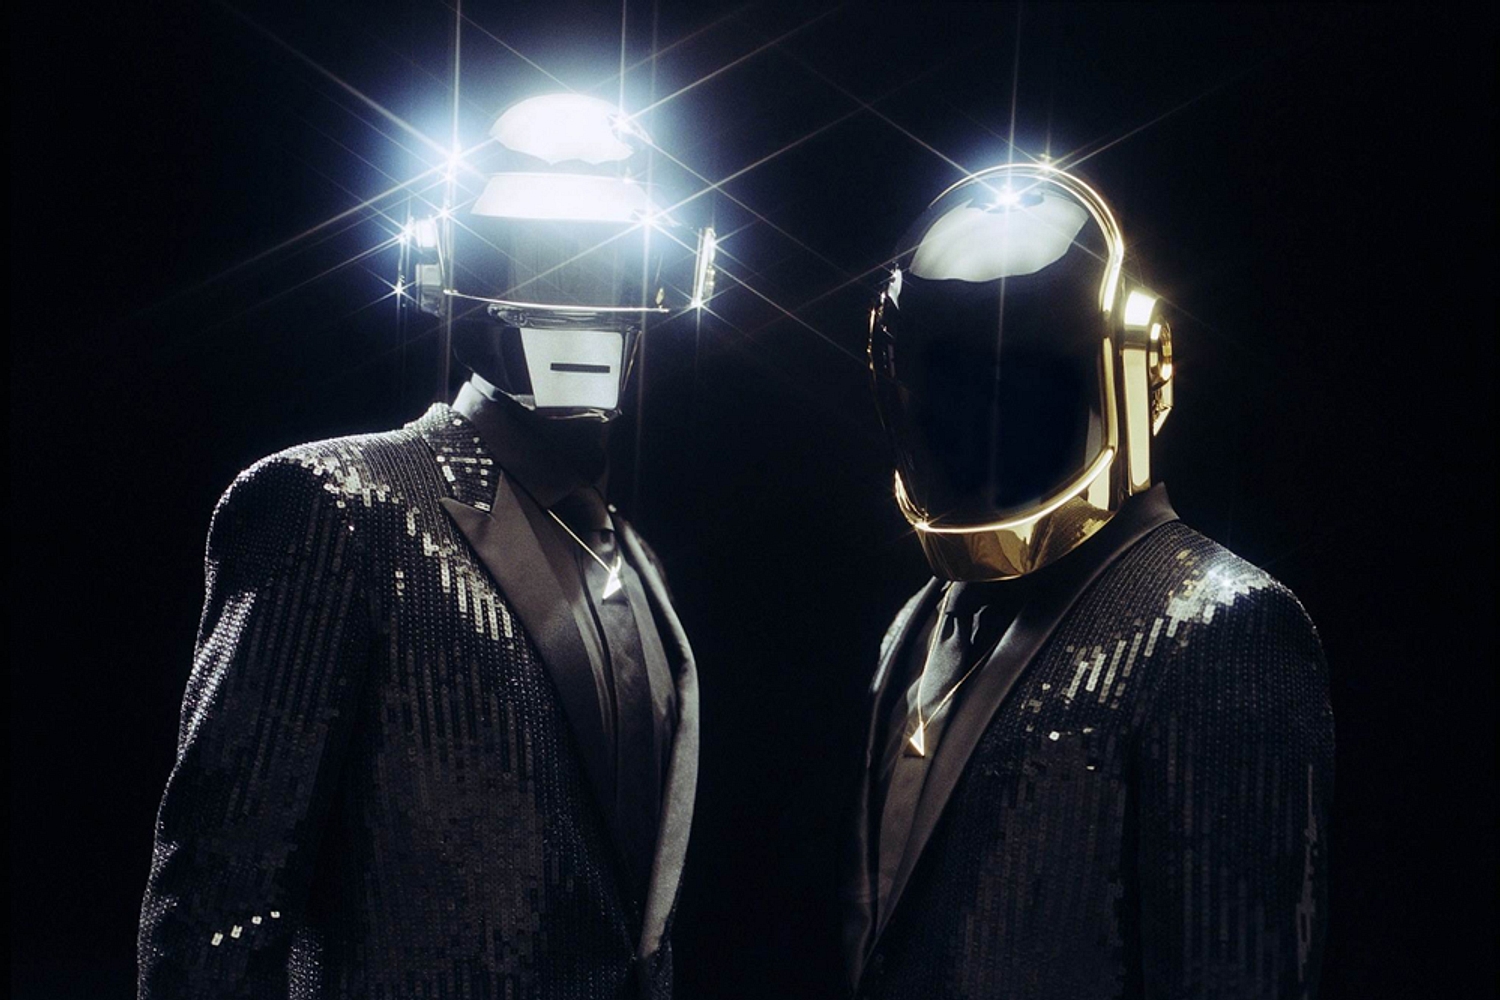 ‘Daft Punk Unchained’ documentary will feature Kanye West, Pharrell, Nile Rodgers, and more